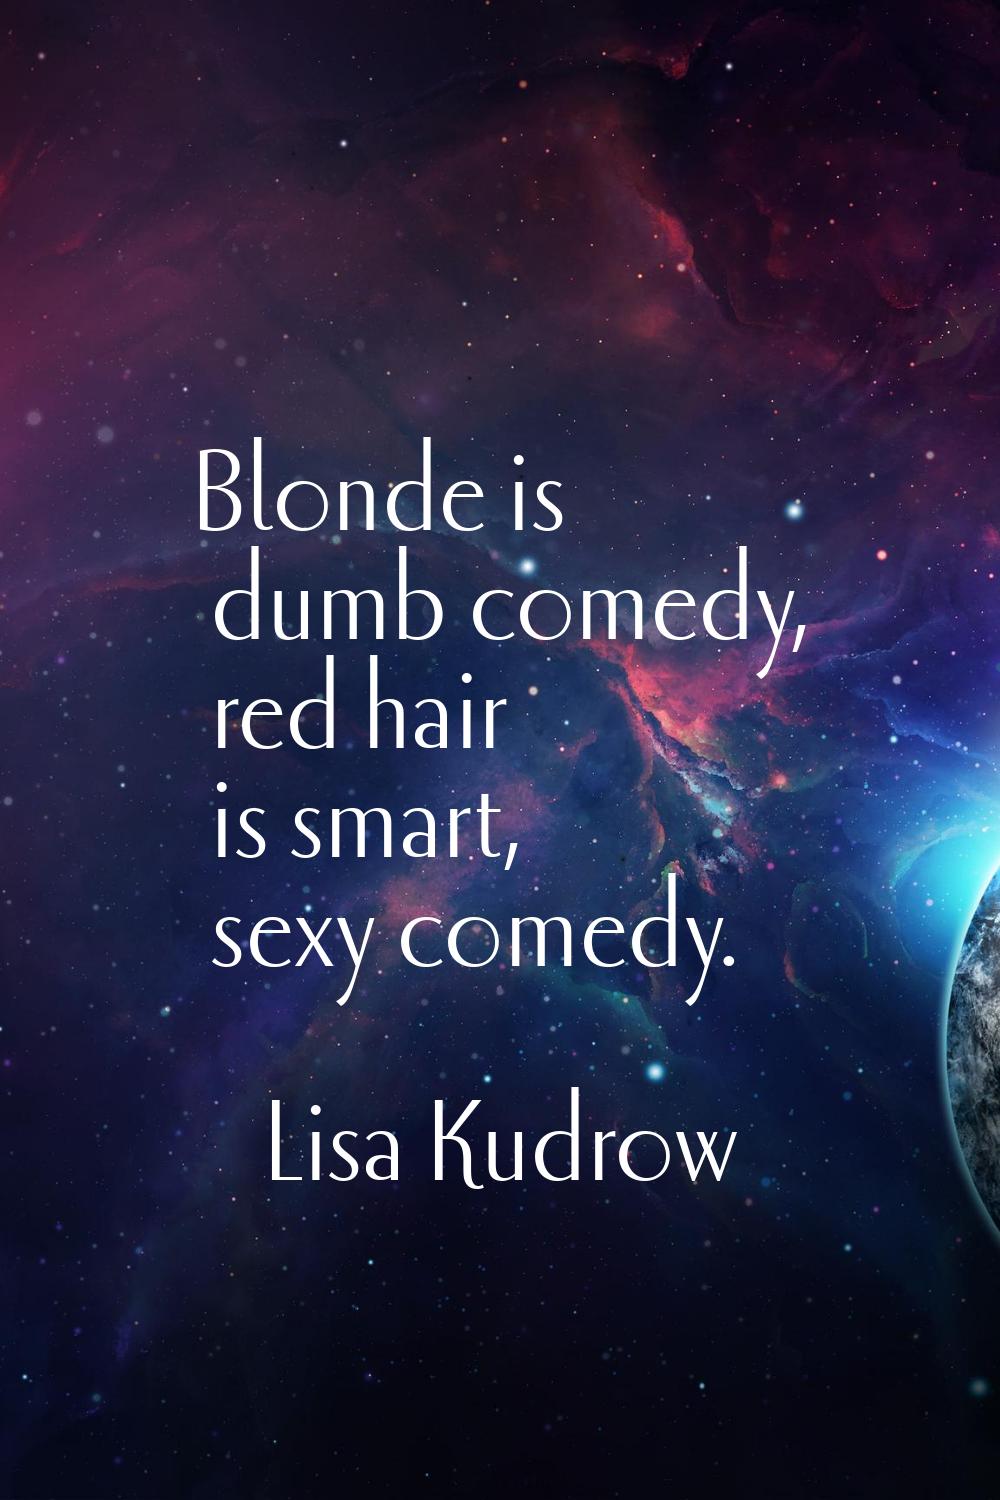 Blonde is dumb comedy, red hair is smart, sexy comedy.